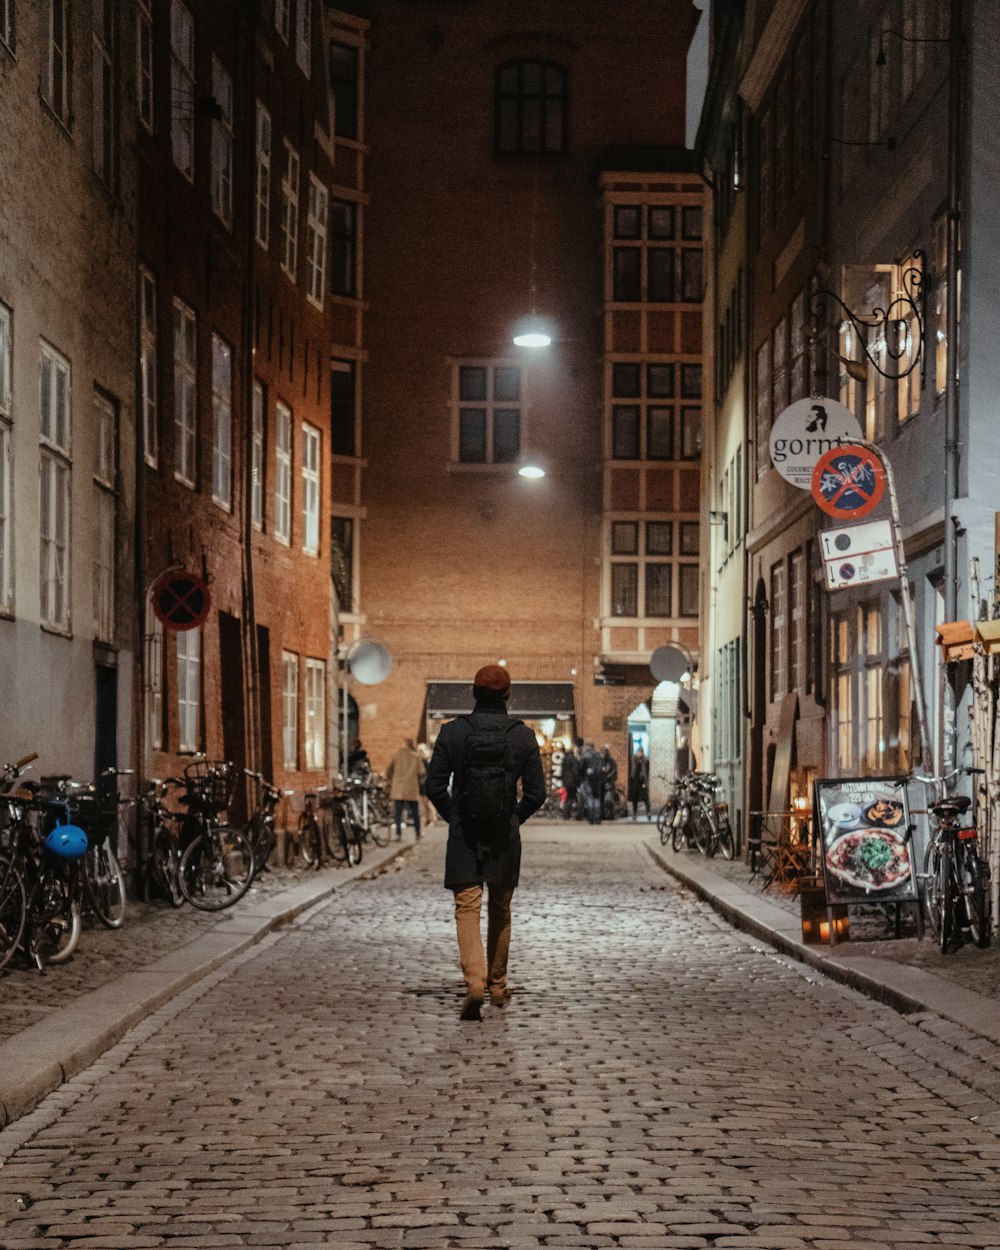 person walking in middle of pathway surrounded by buildings during night time